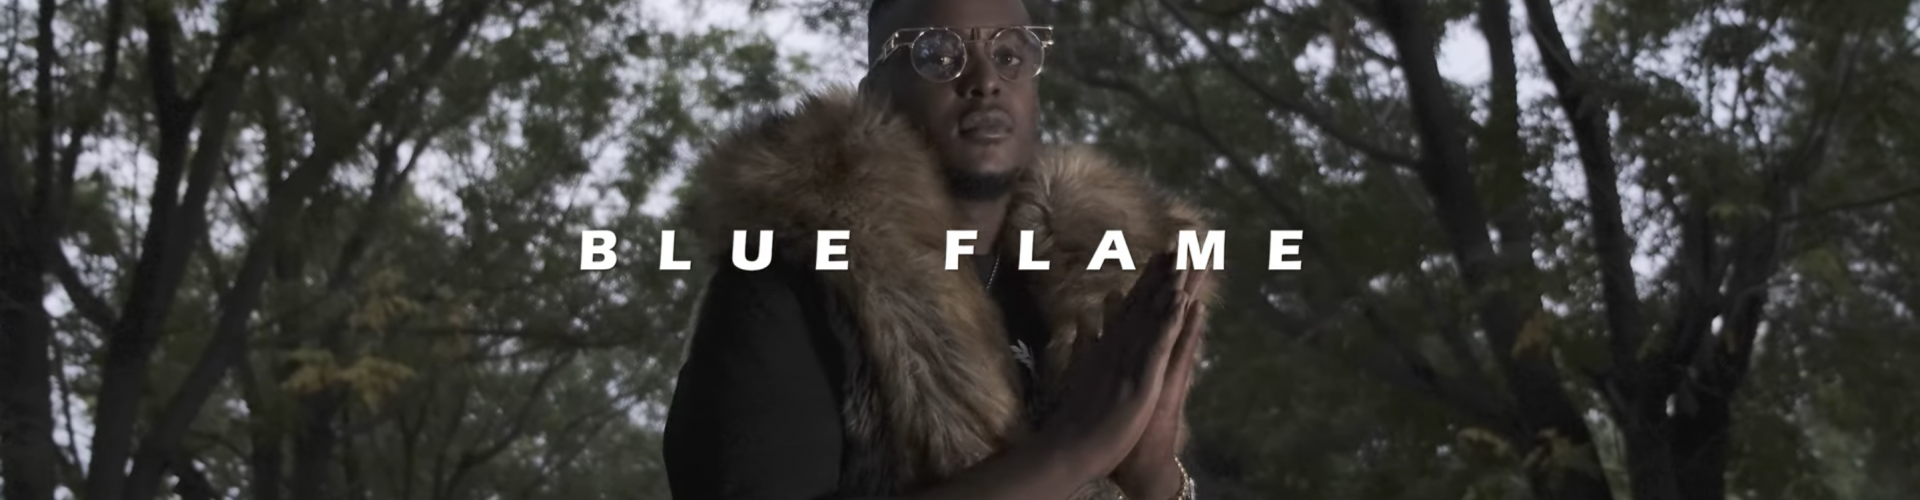 Blueflame – Beastmode (Official Video)